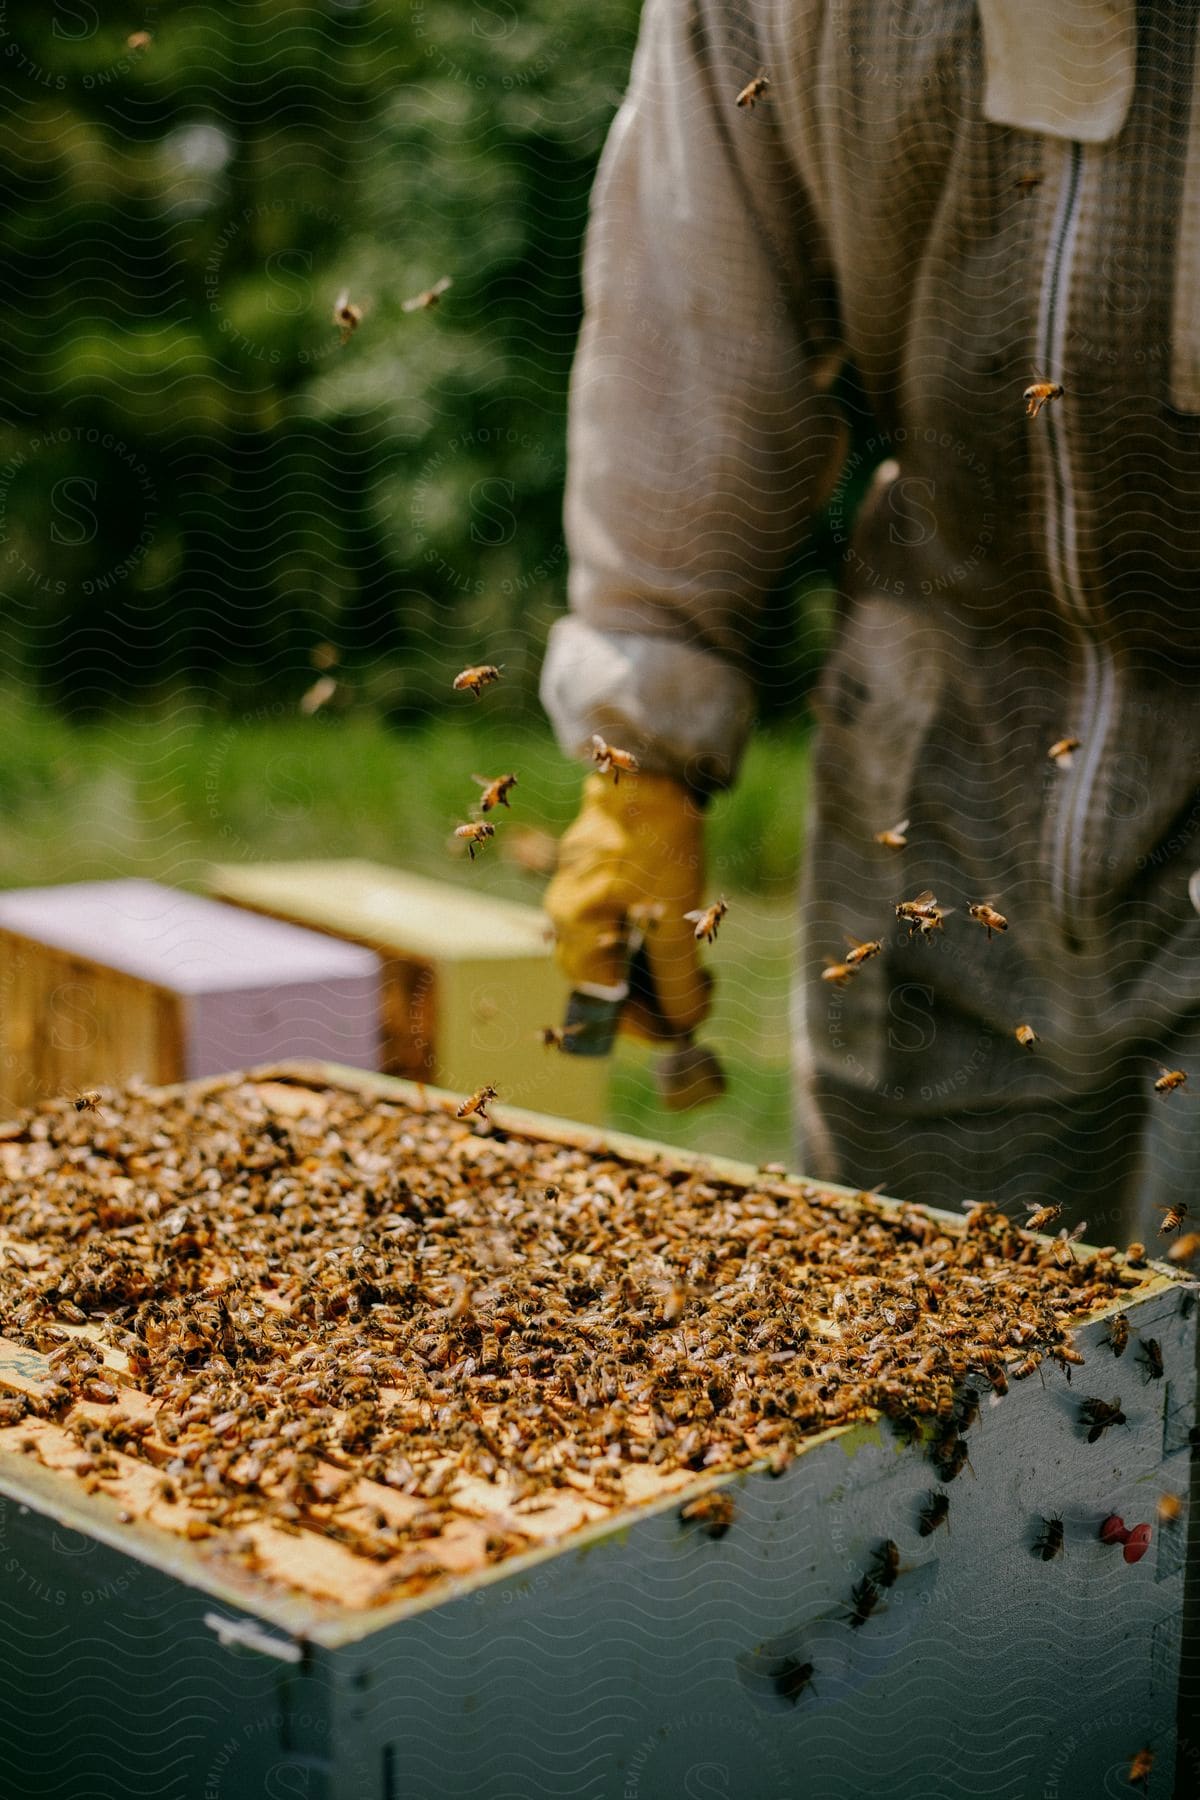 Stock photo of a man is outdoors approaching an active honeybee hive while wearing a protective suit and gloves in the daytime.